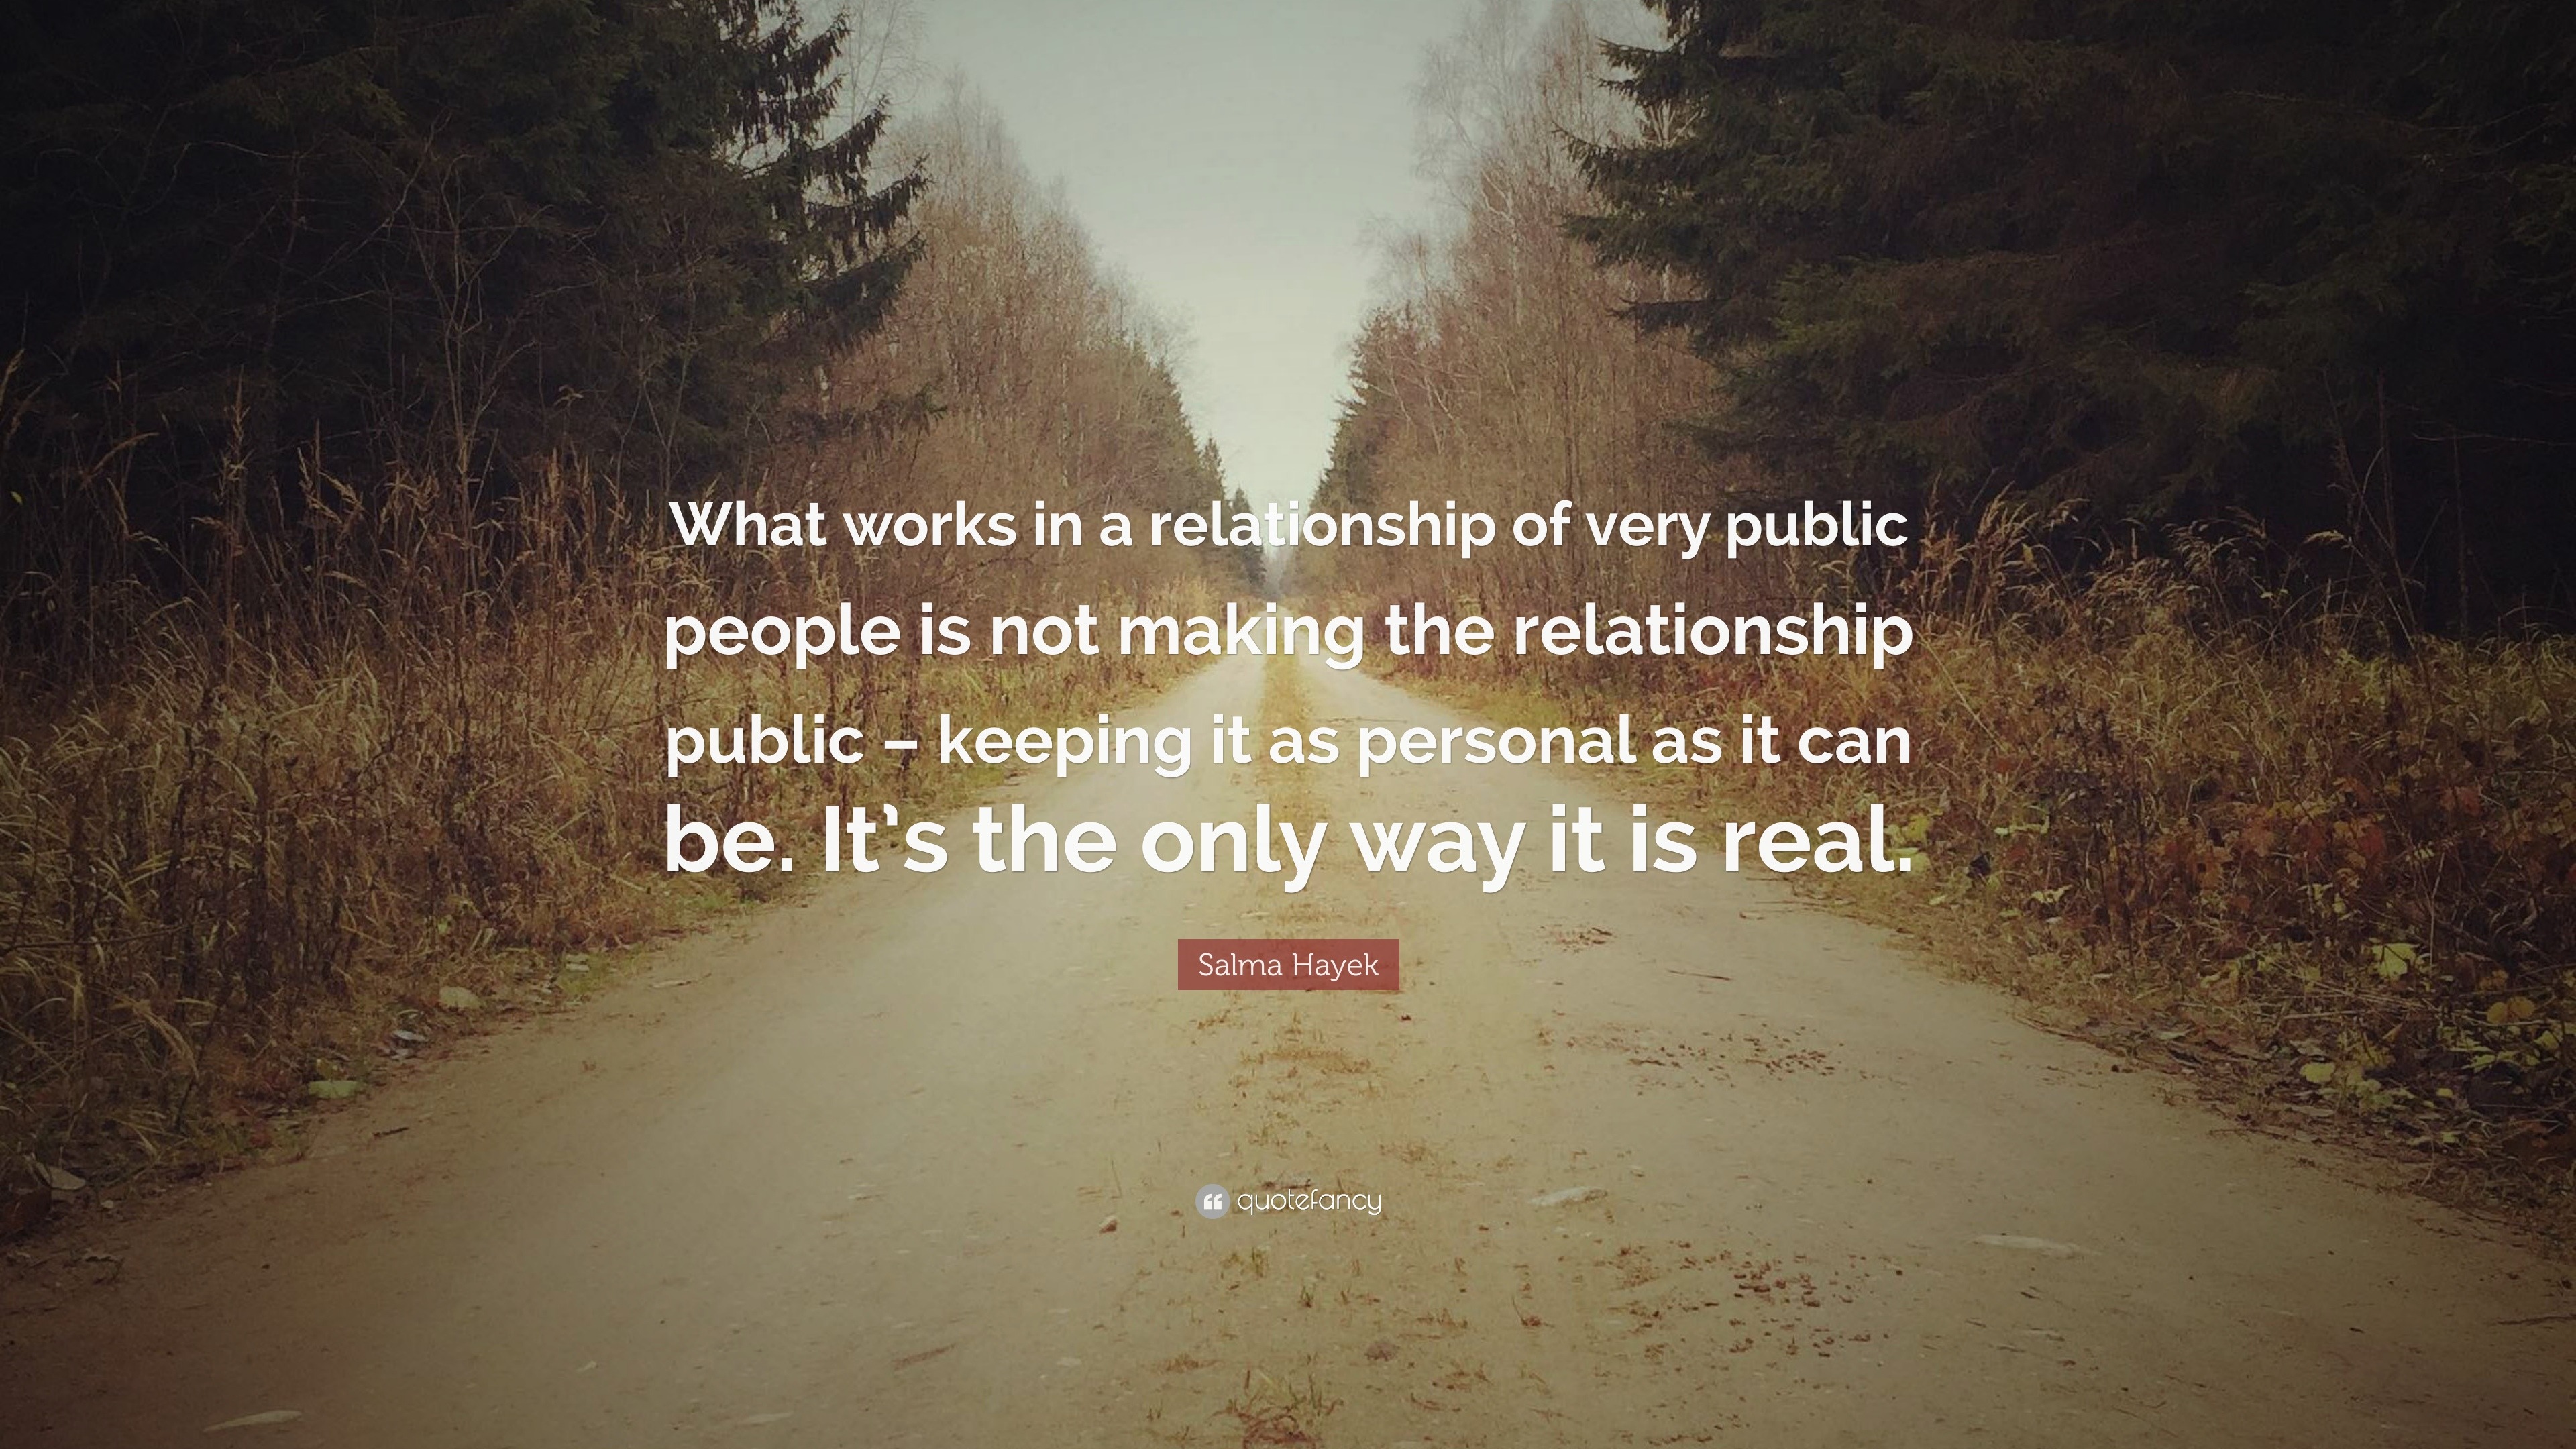 Salma Hayek Quote: “What works in a relationship of very public people ...